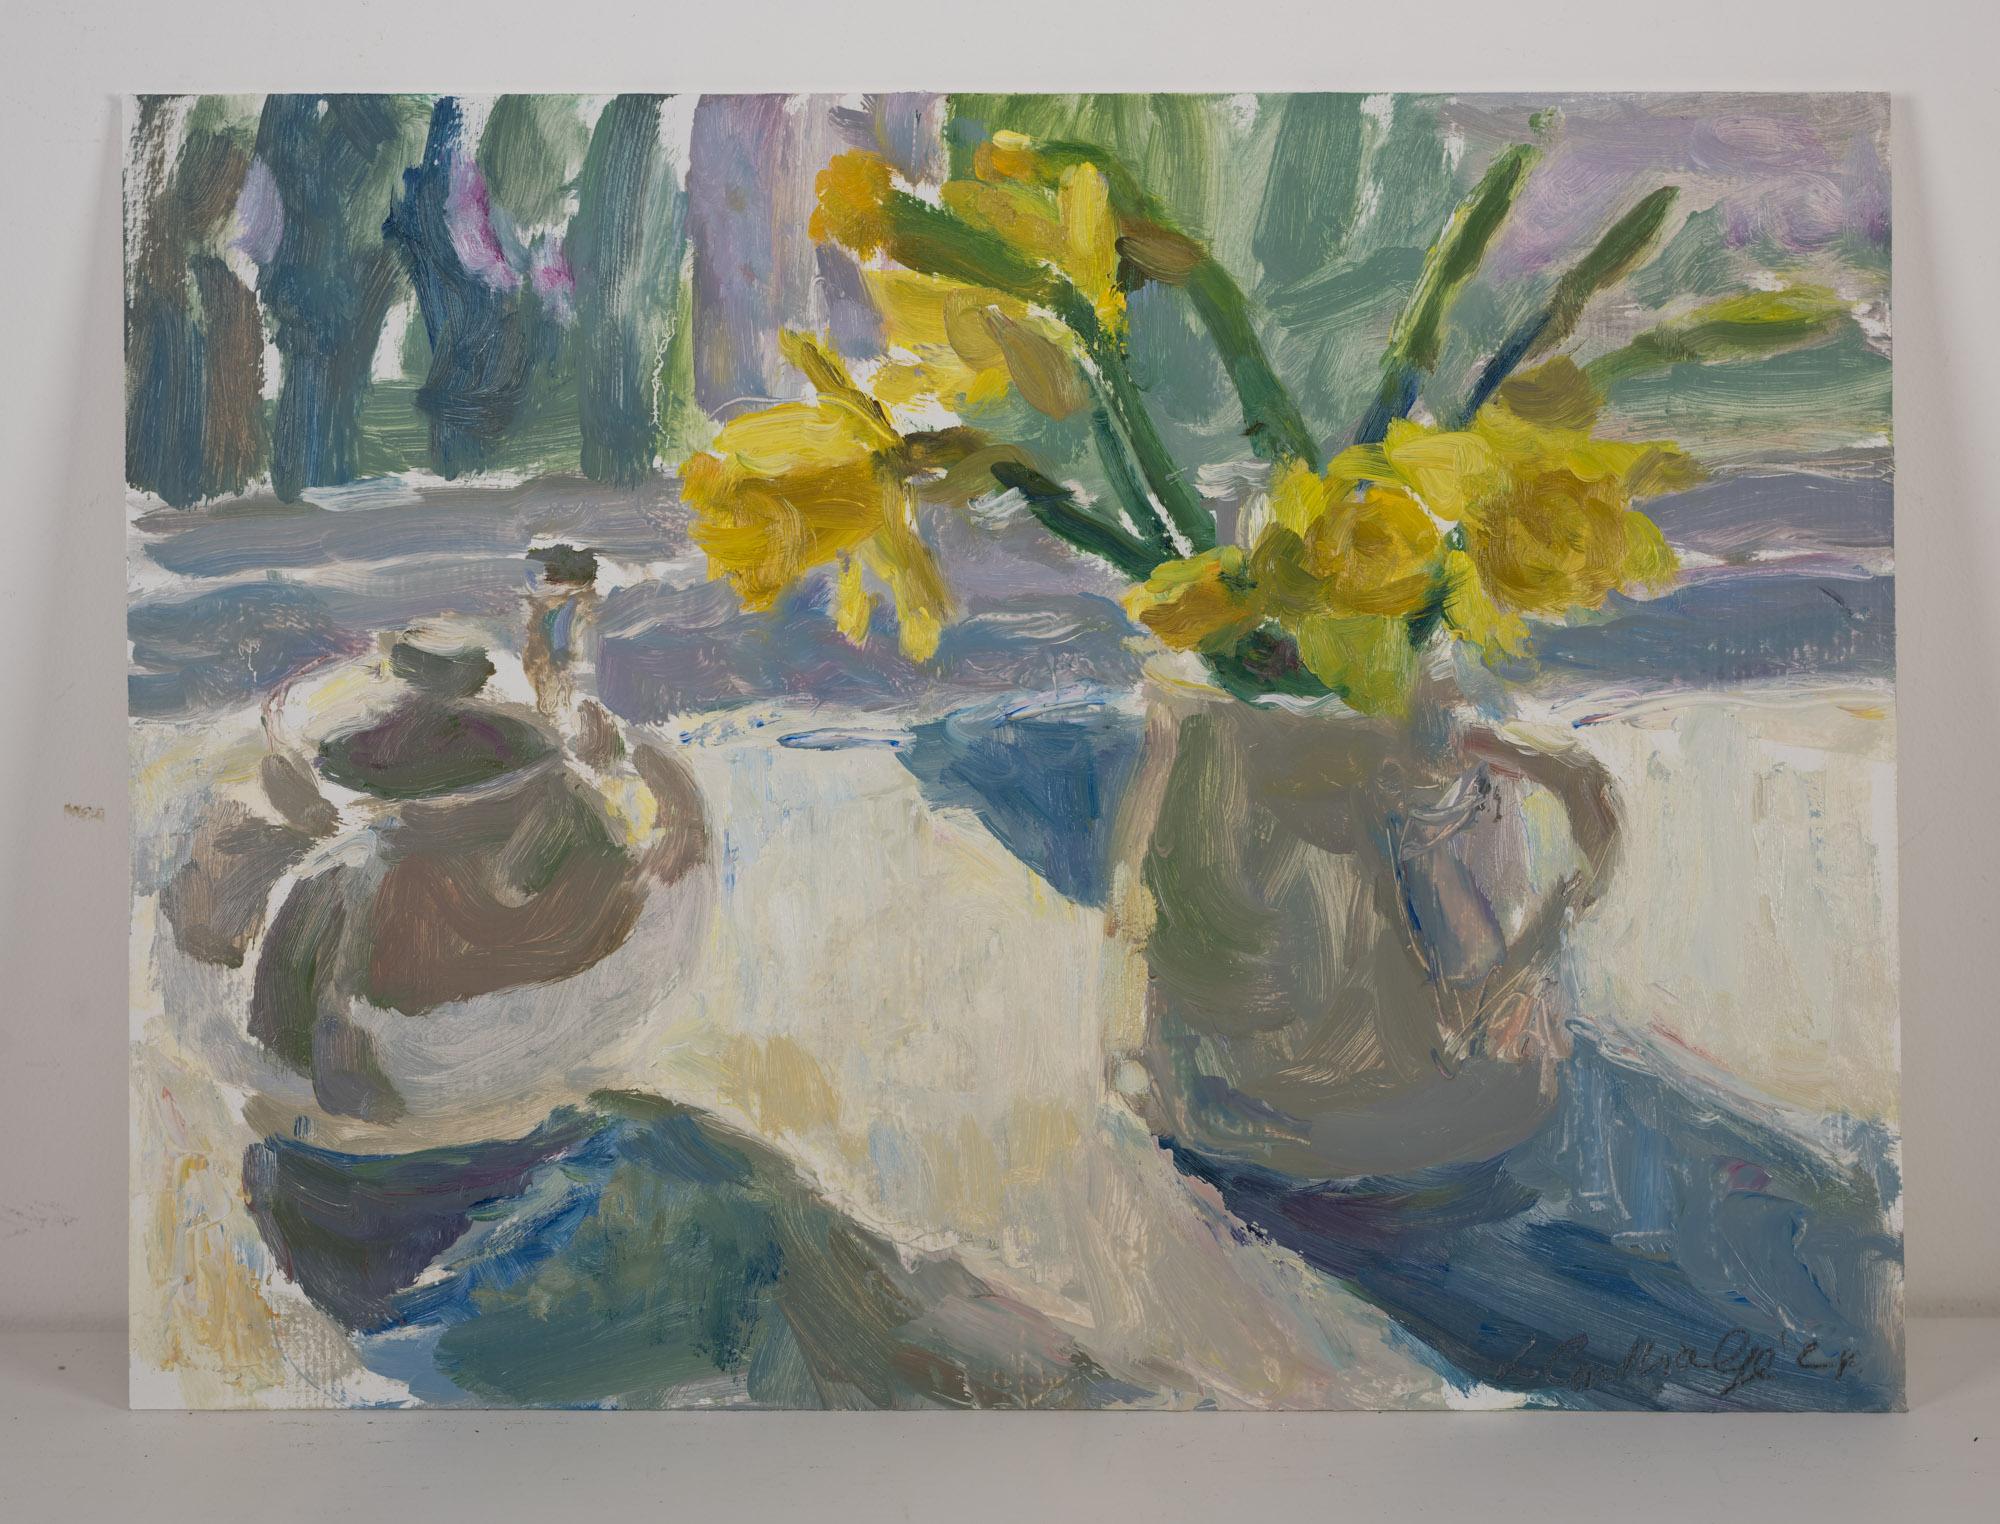 Teapot and Daffodils in Sunlight